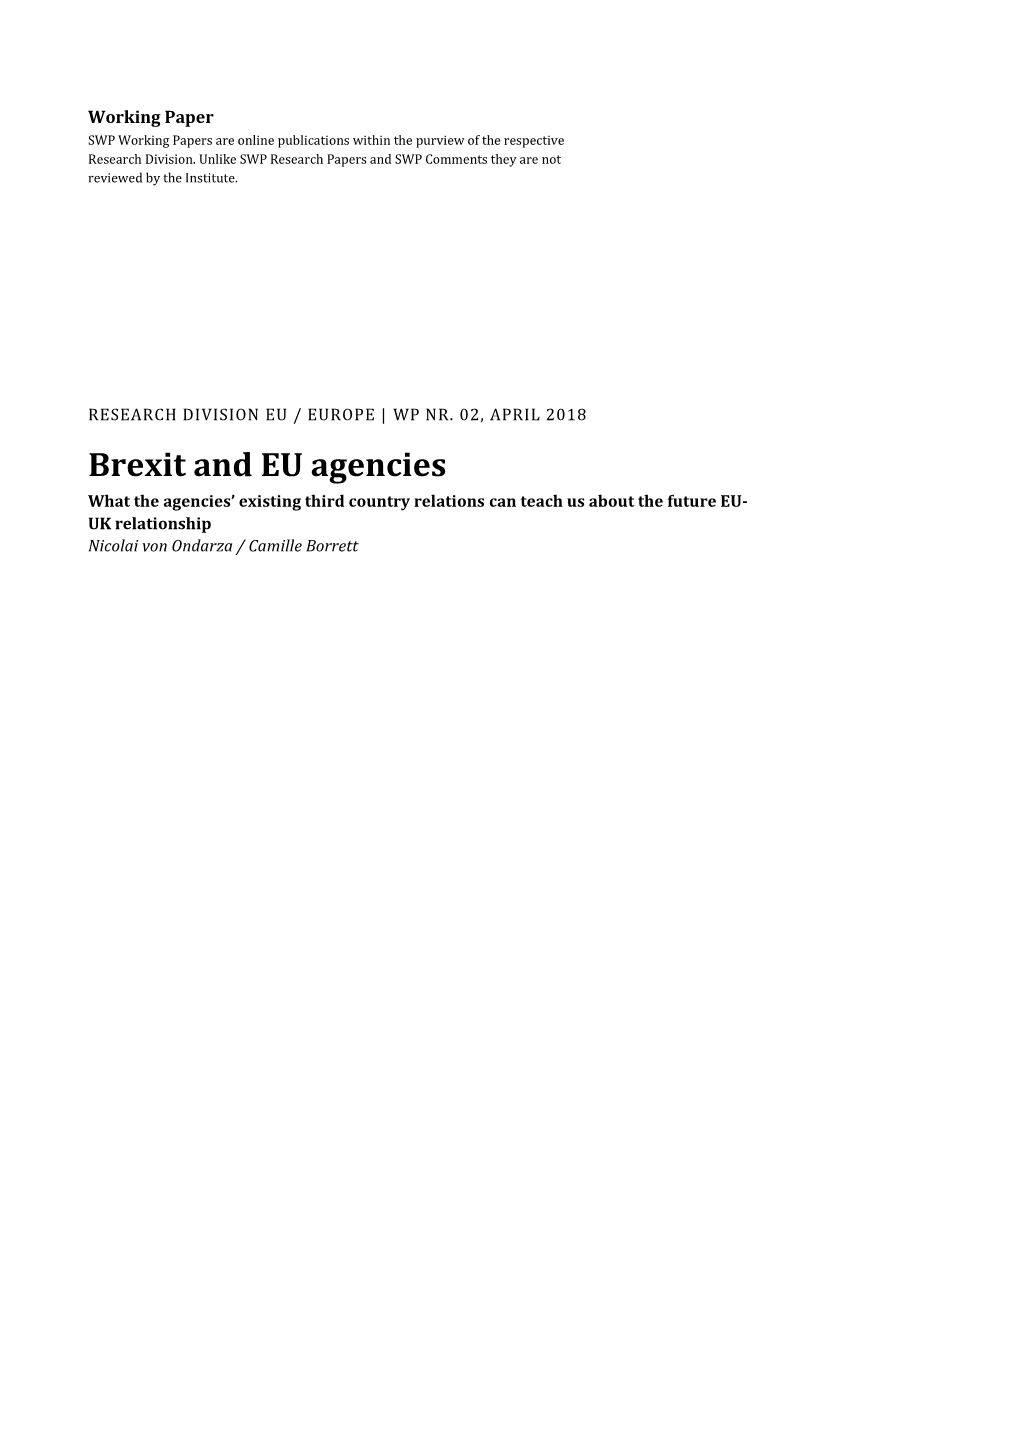 Brexit and EU Agencies What the Agencies’ Existing Third Country Relations Can Teach Us About the Future EU- UK Relationship Nicolai Von Ondarza / Camille Borrett